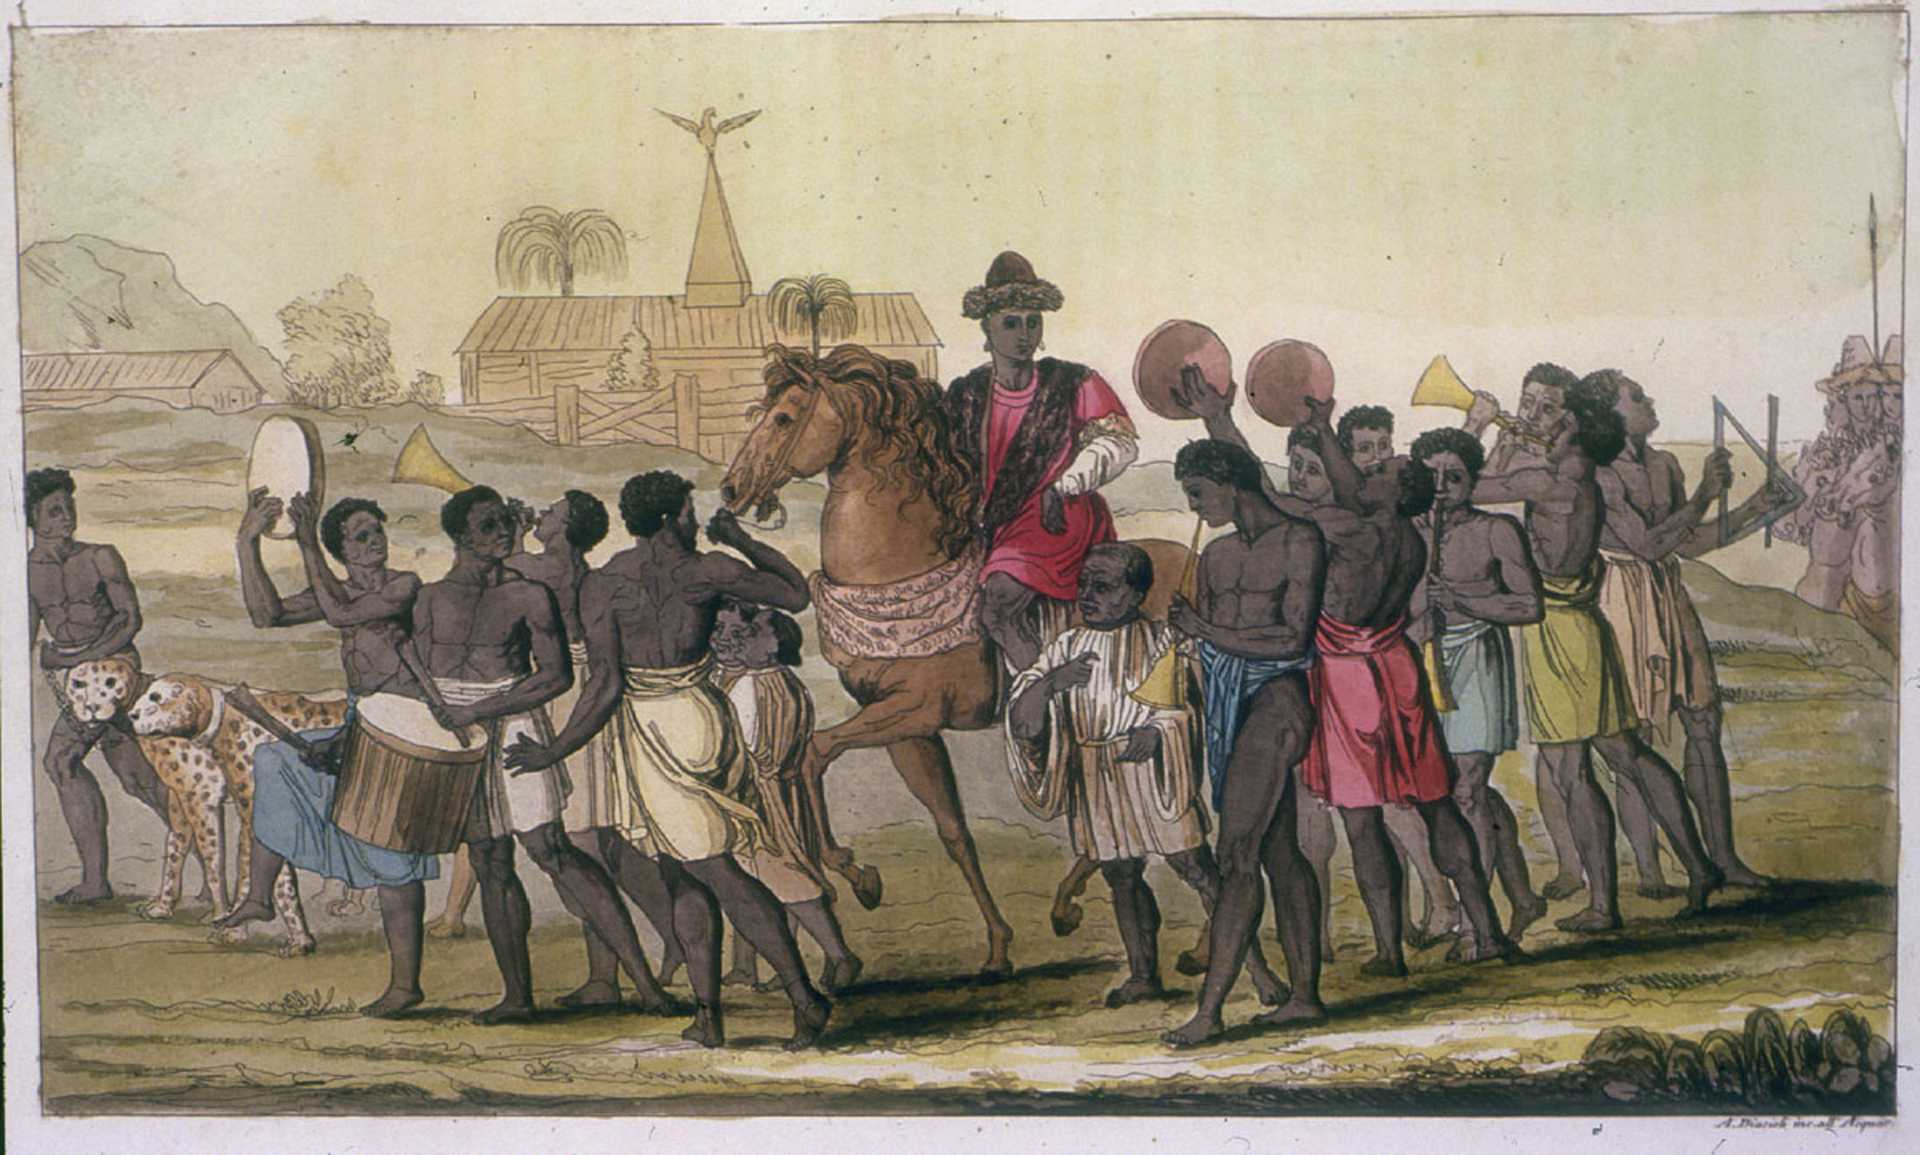 Painting of the King of Benin on horseback with other people crowded around him